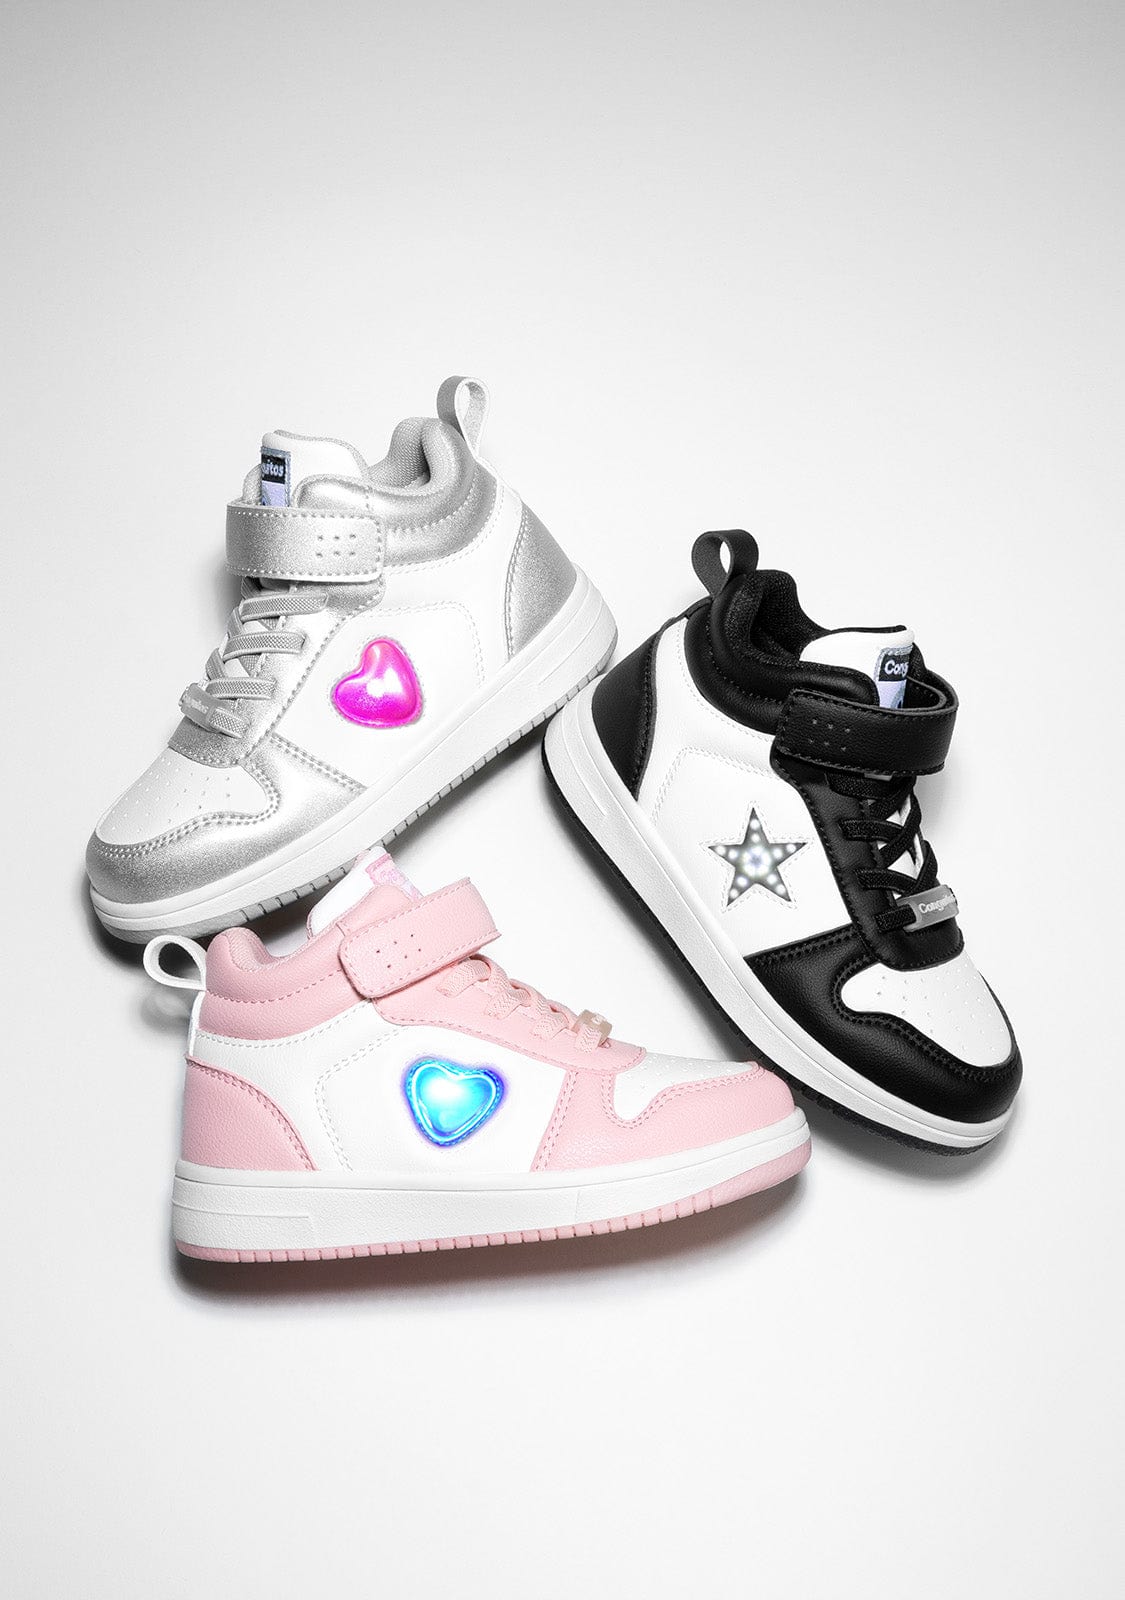 CONGUITOS Shoes Girl´s Pink - White With Lights Hi-Top Sneakers Napa